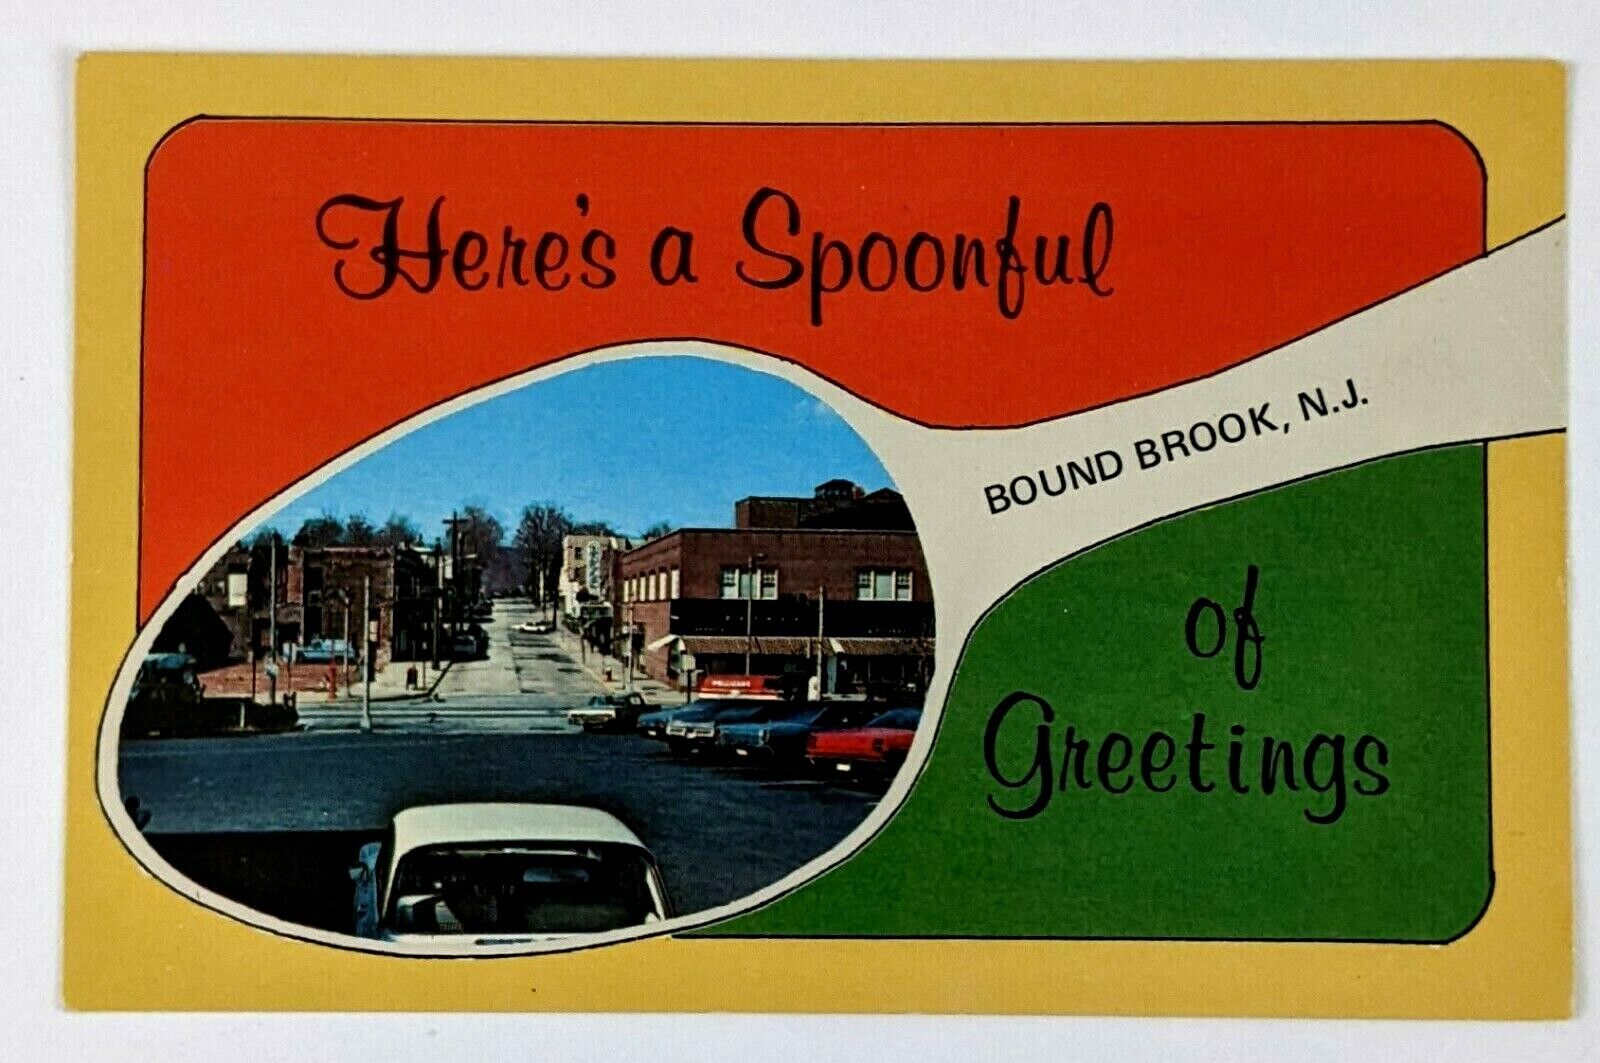 1974 Bound Brook New Jersey Spoonful of Greetings Vintage Postcard Hamilton St